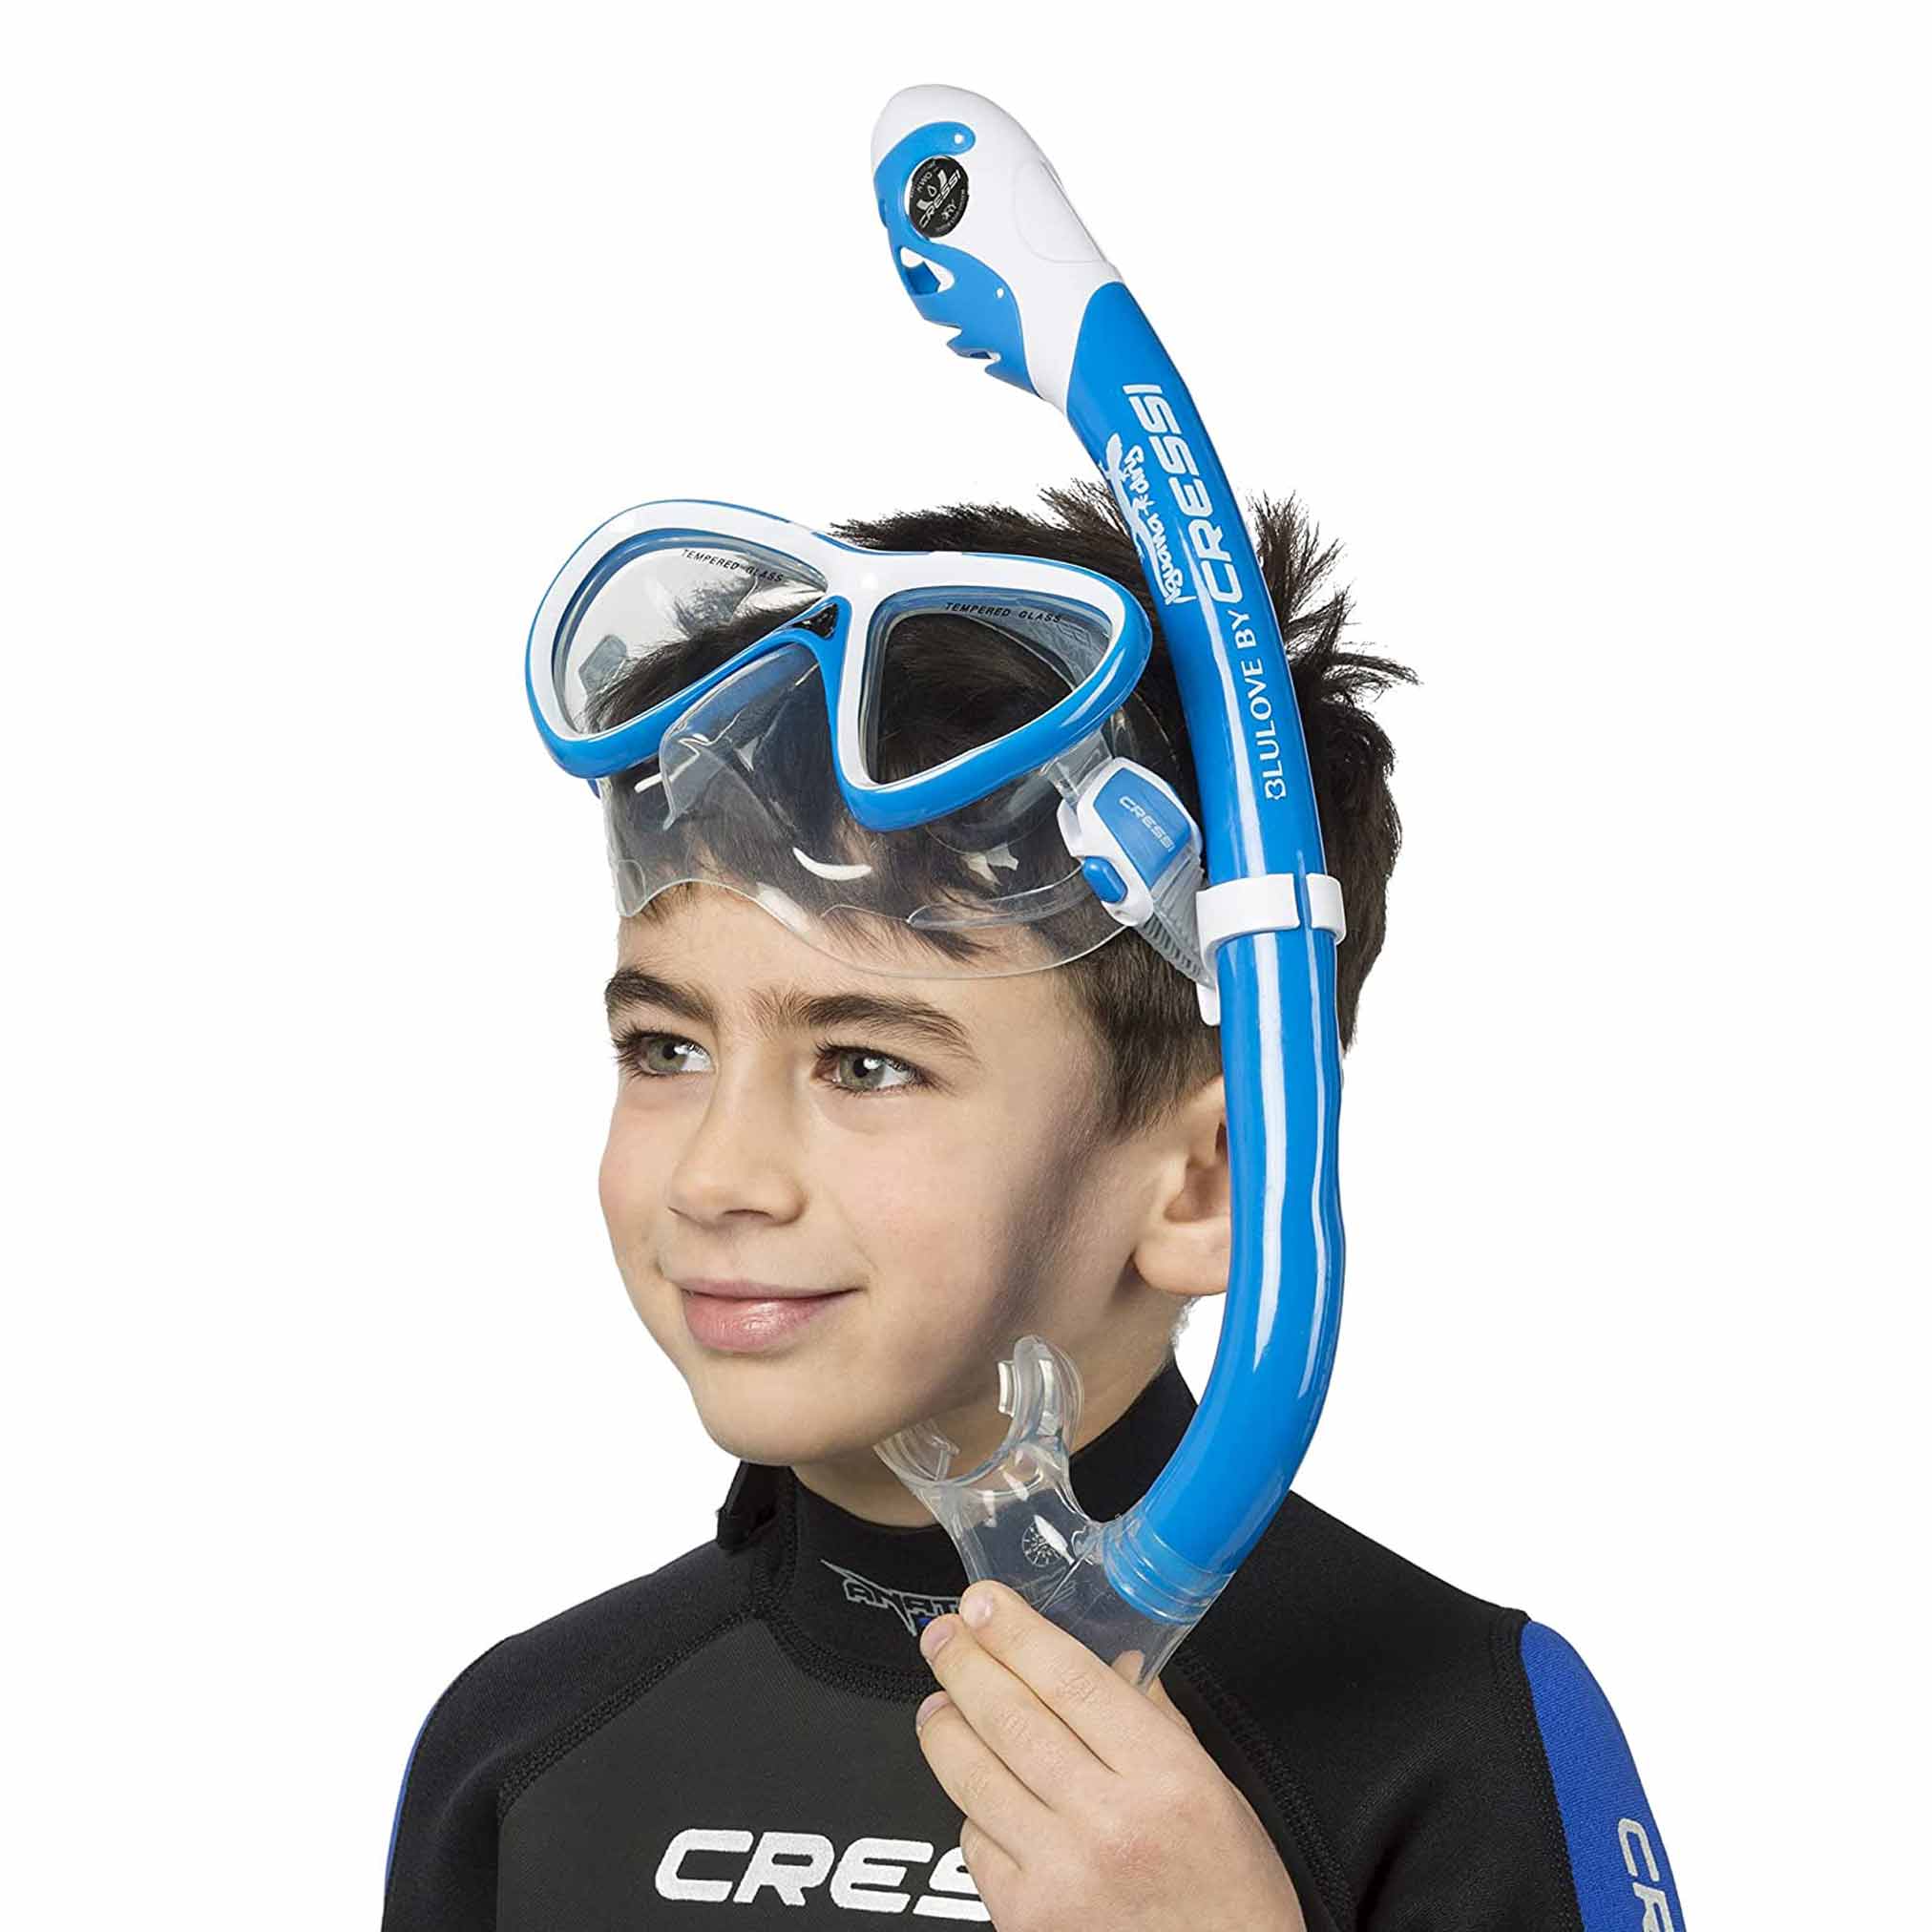 Cressi Junior Snorkeling Kit for Young Aged 3 to 10 - Mask + Dry Snorkel +  Adjustable Fins + Net Bag - Lightweight Colorful Equipment - Rocks Pro Dry